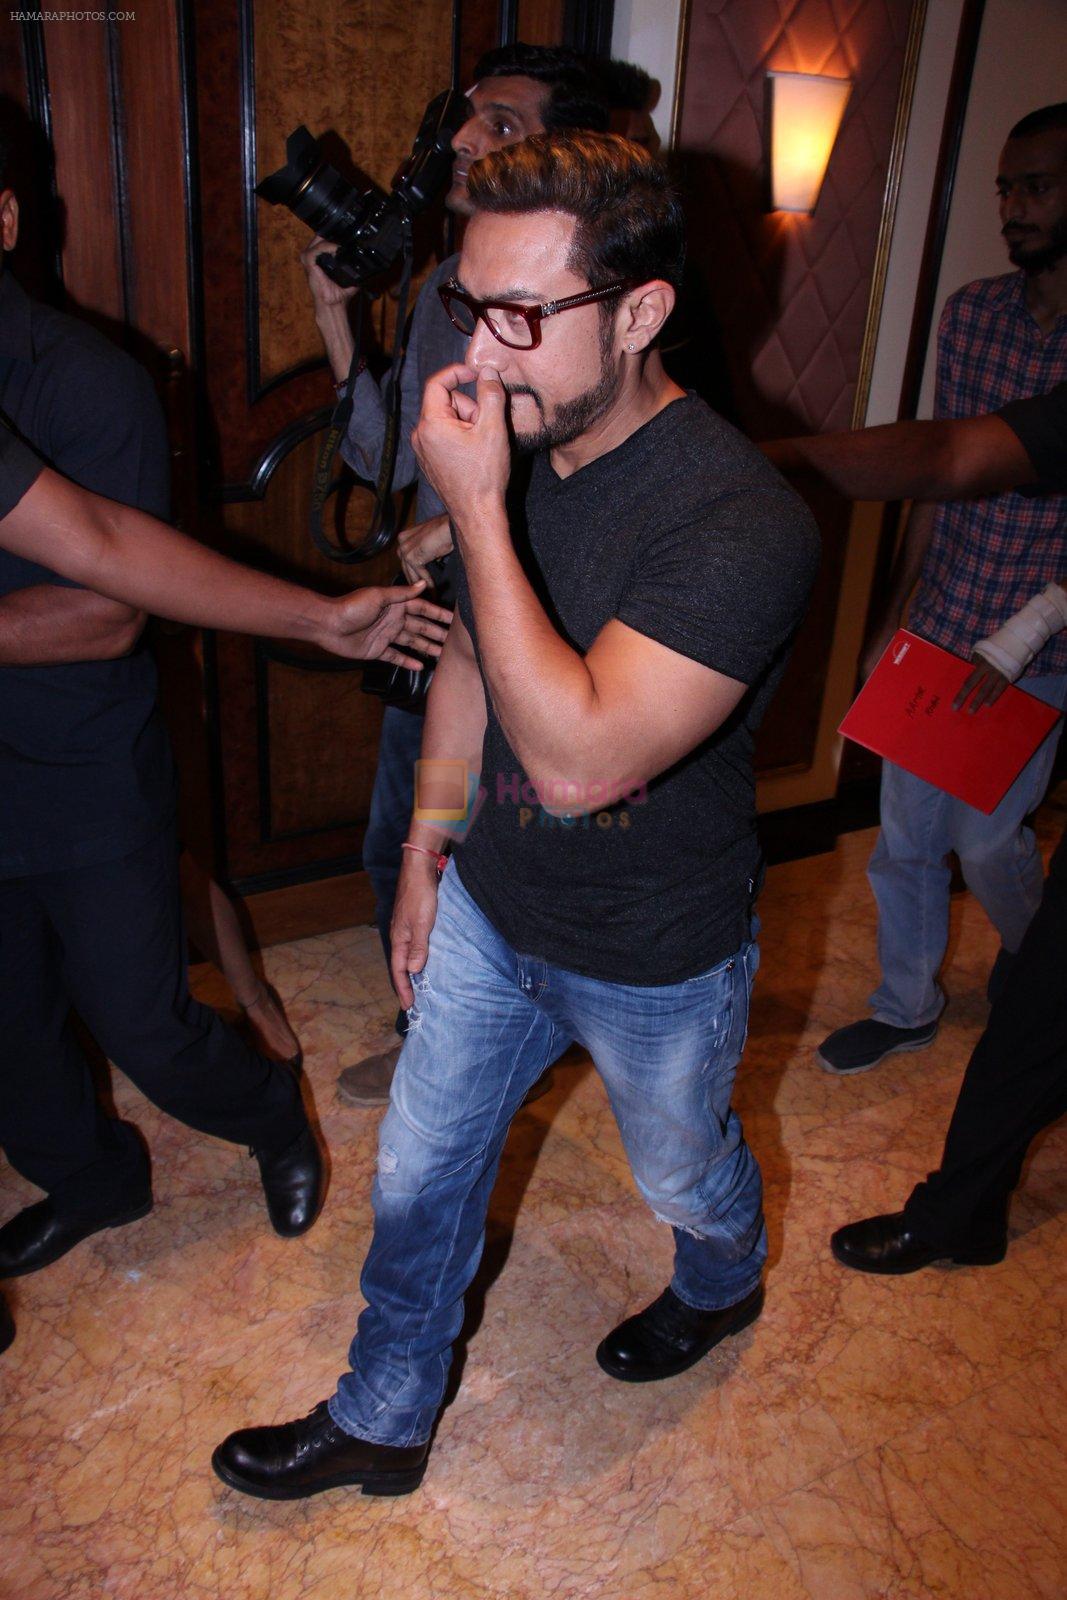 Aamir Khan at the launch of Global Citizen India on 11th Sept 2016